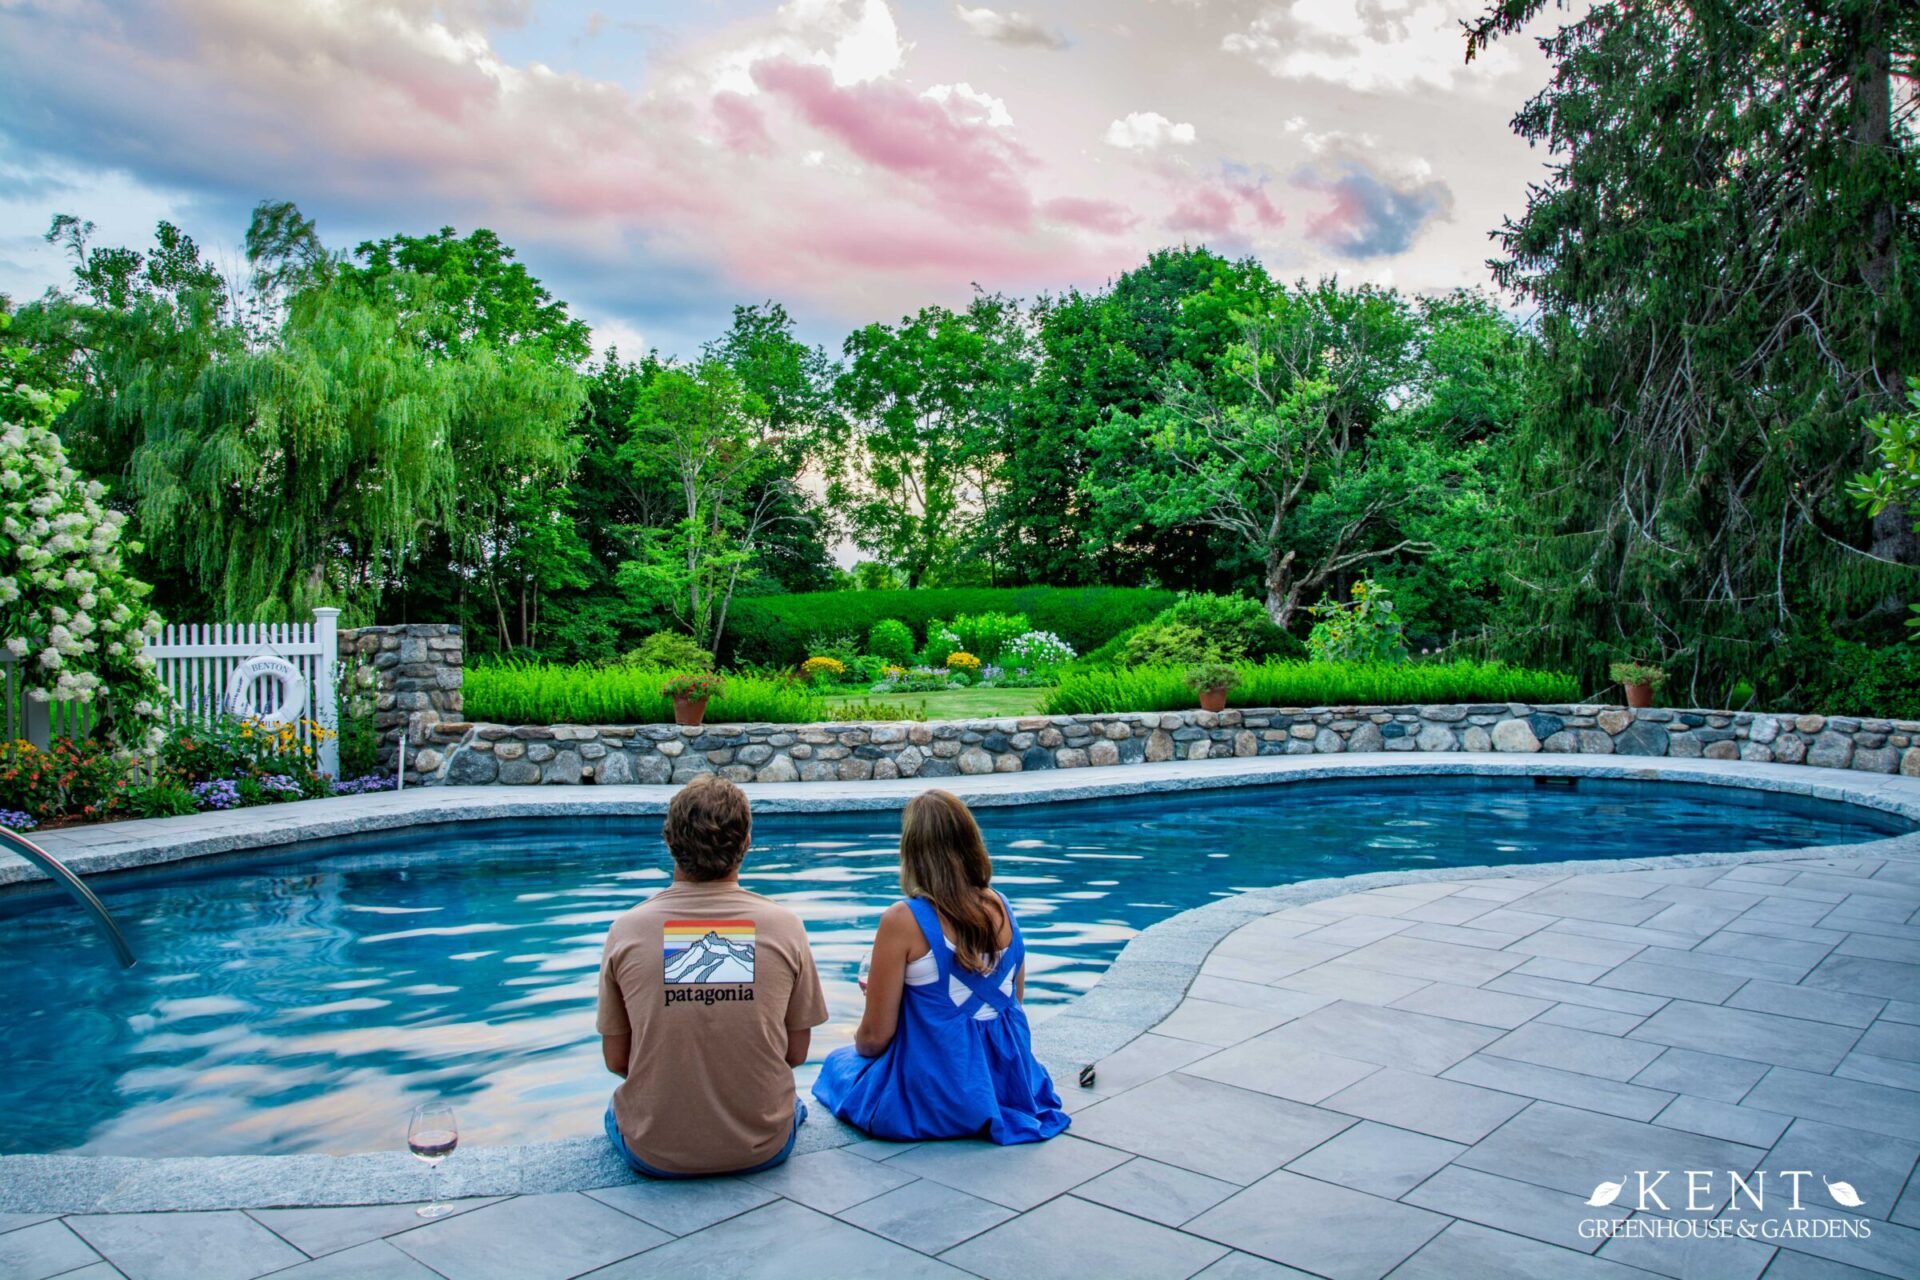 Two people sit by a serene pool, gazing at a lush garden, under a pastel sky at dusk, exuding a tranquil, picturesque summer evening ambiance.